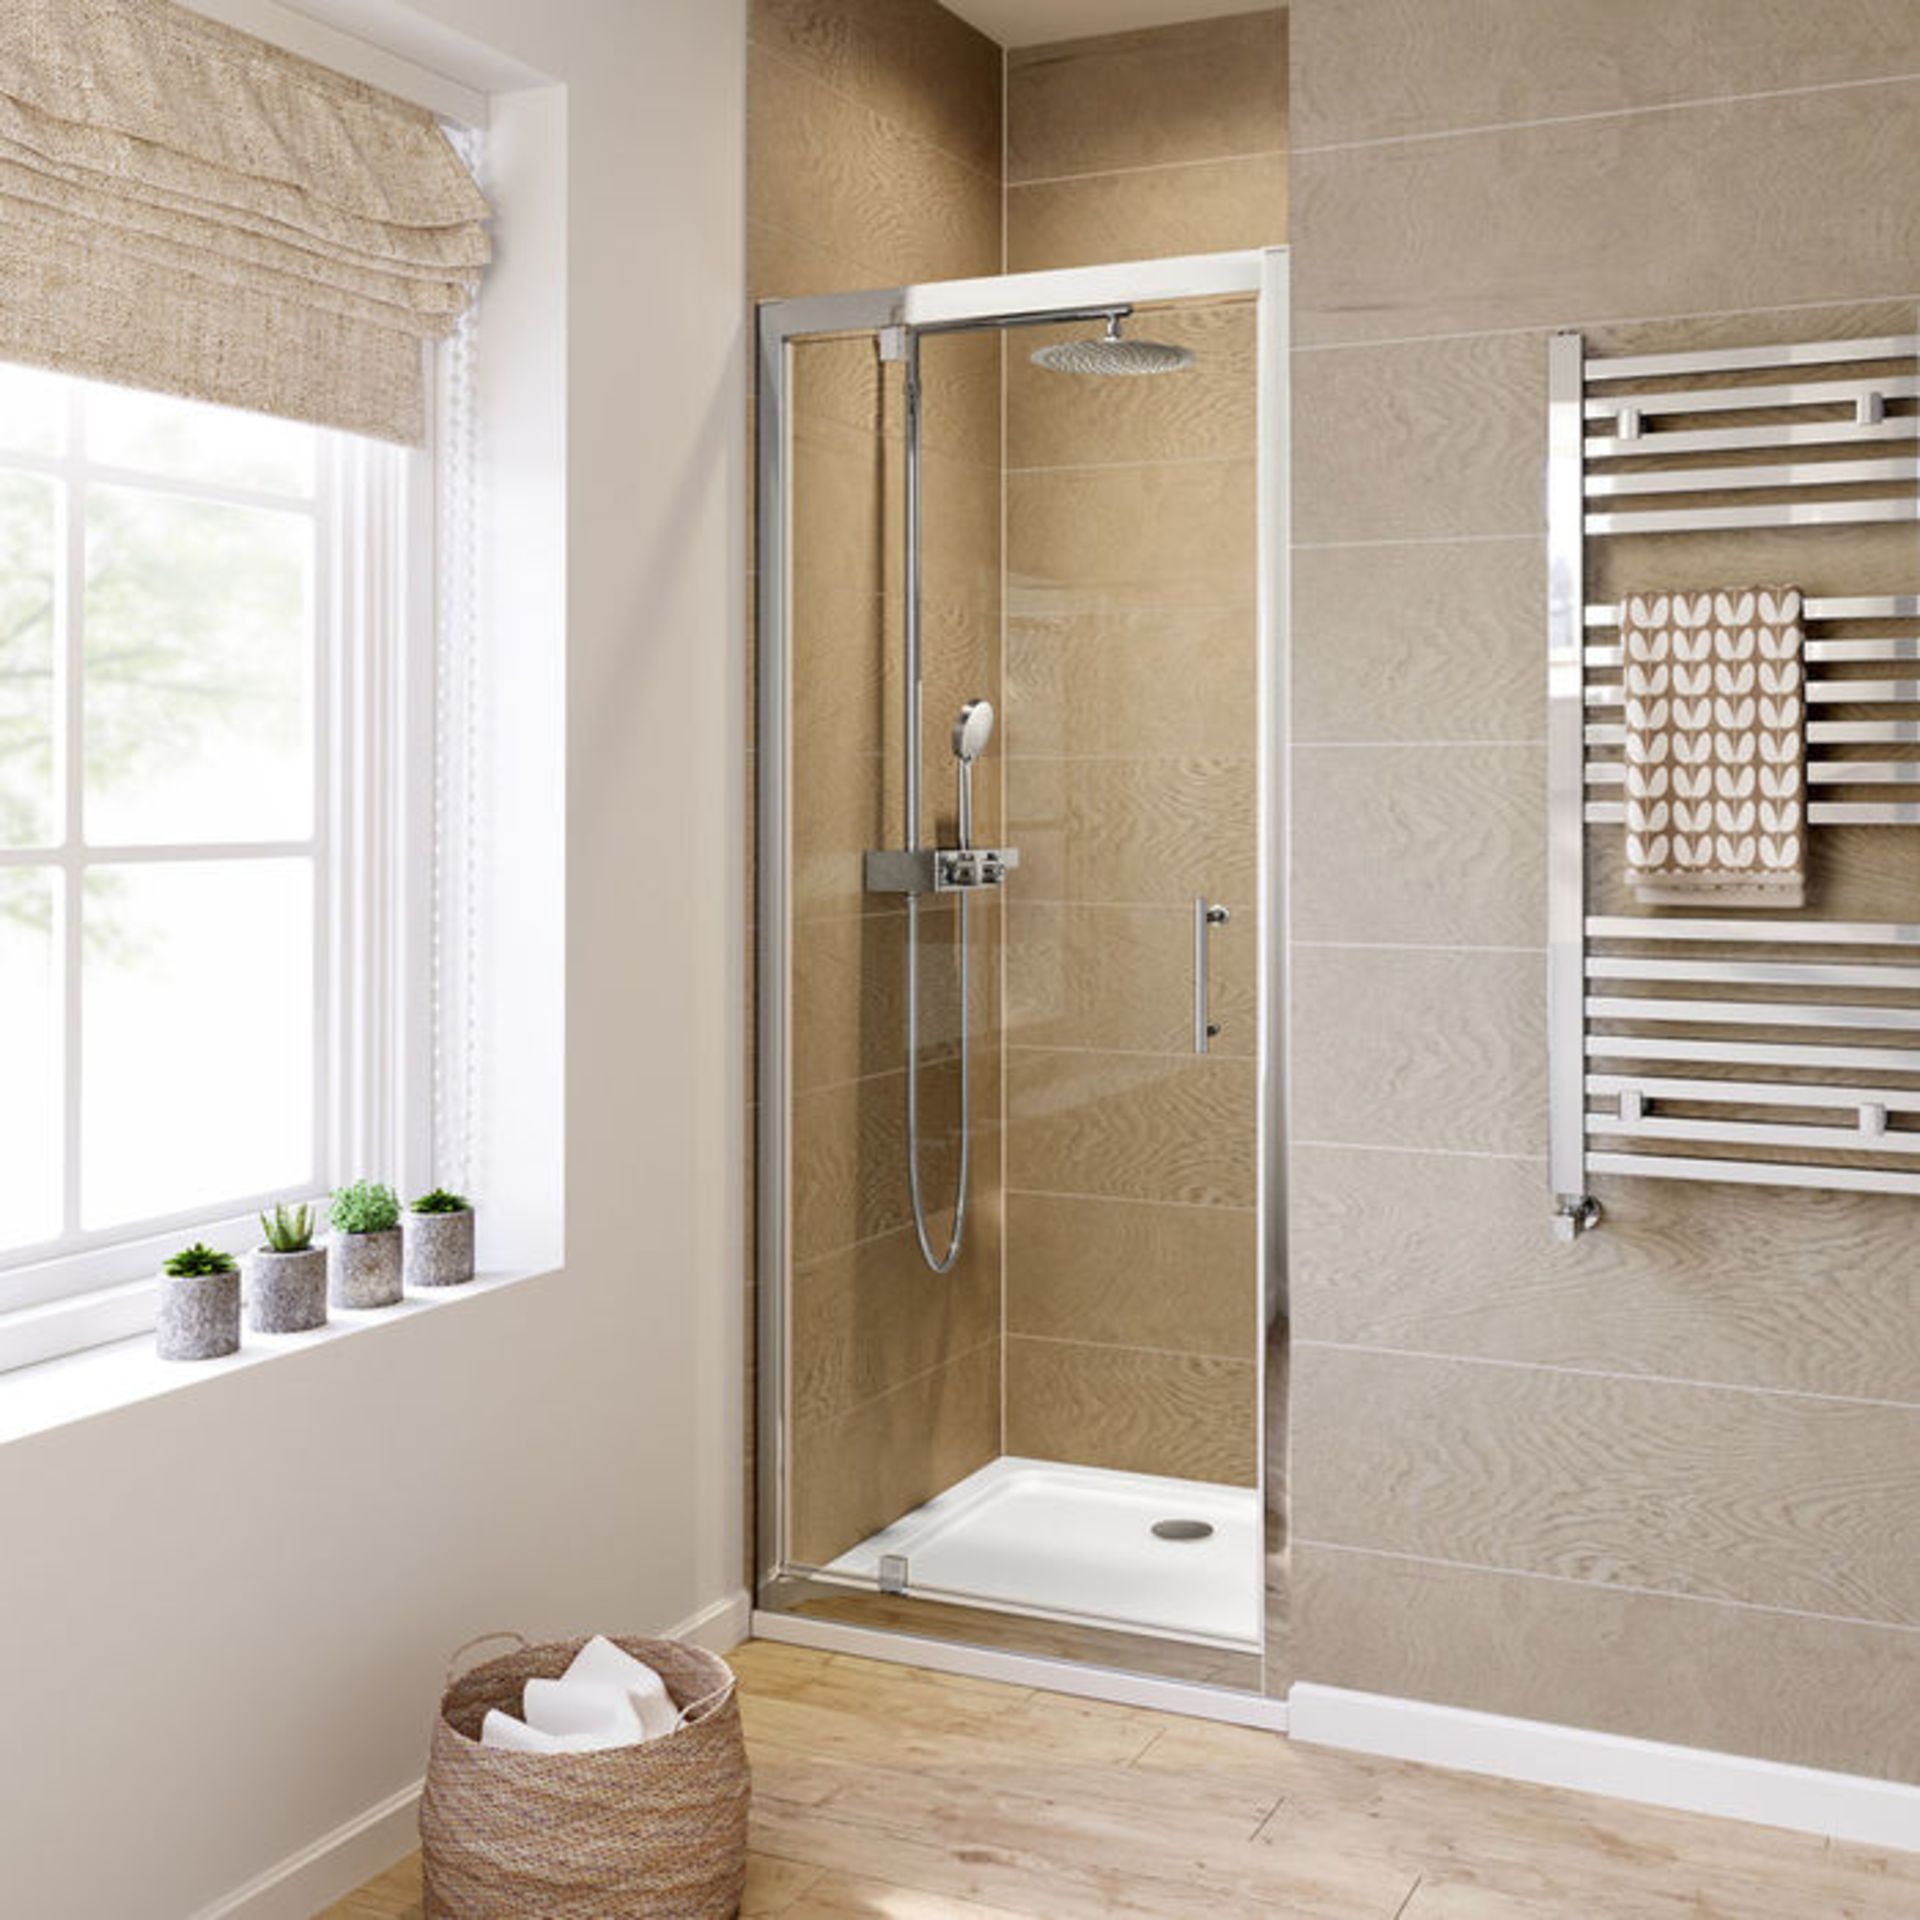 (XM179) 760mm - 6mm - Elements Pivot Shower Door. RRP £299.99. 6mm Safety Glass Fully waterproof - Image 2 of 3